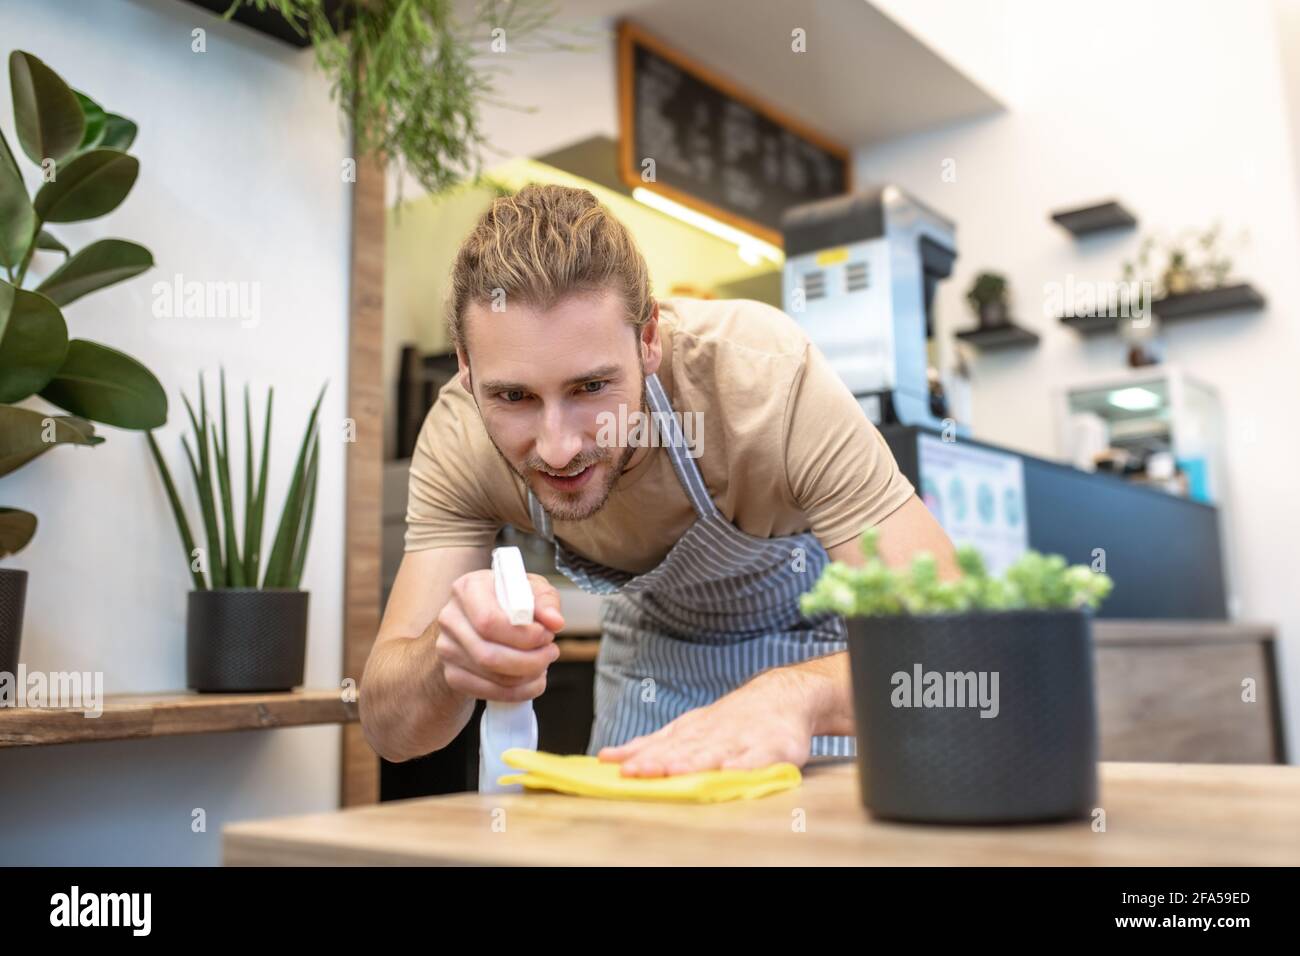 Attentive man wiping the surface with concentration Stock Photo